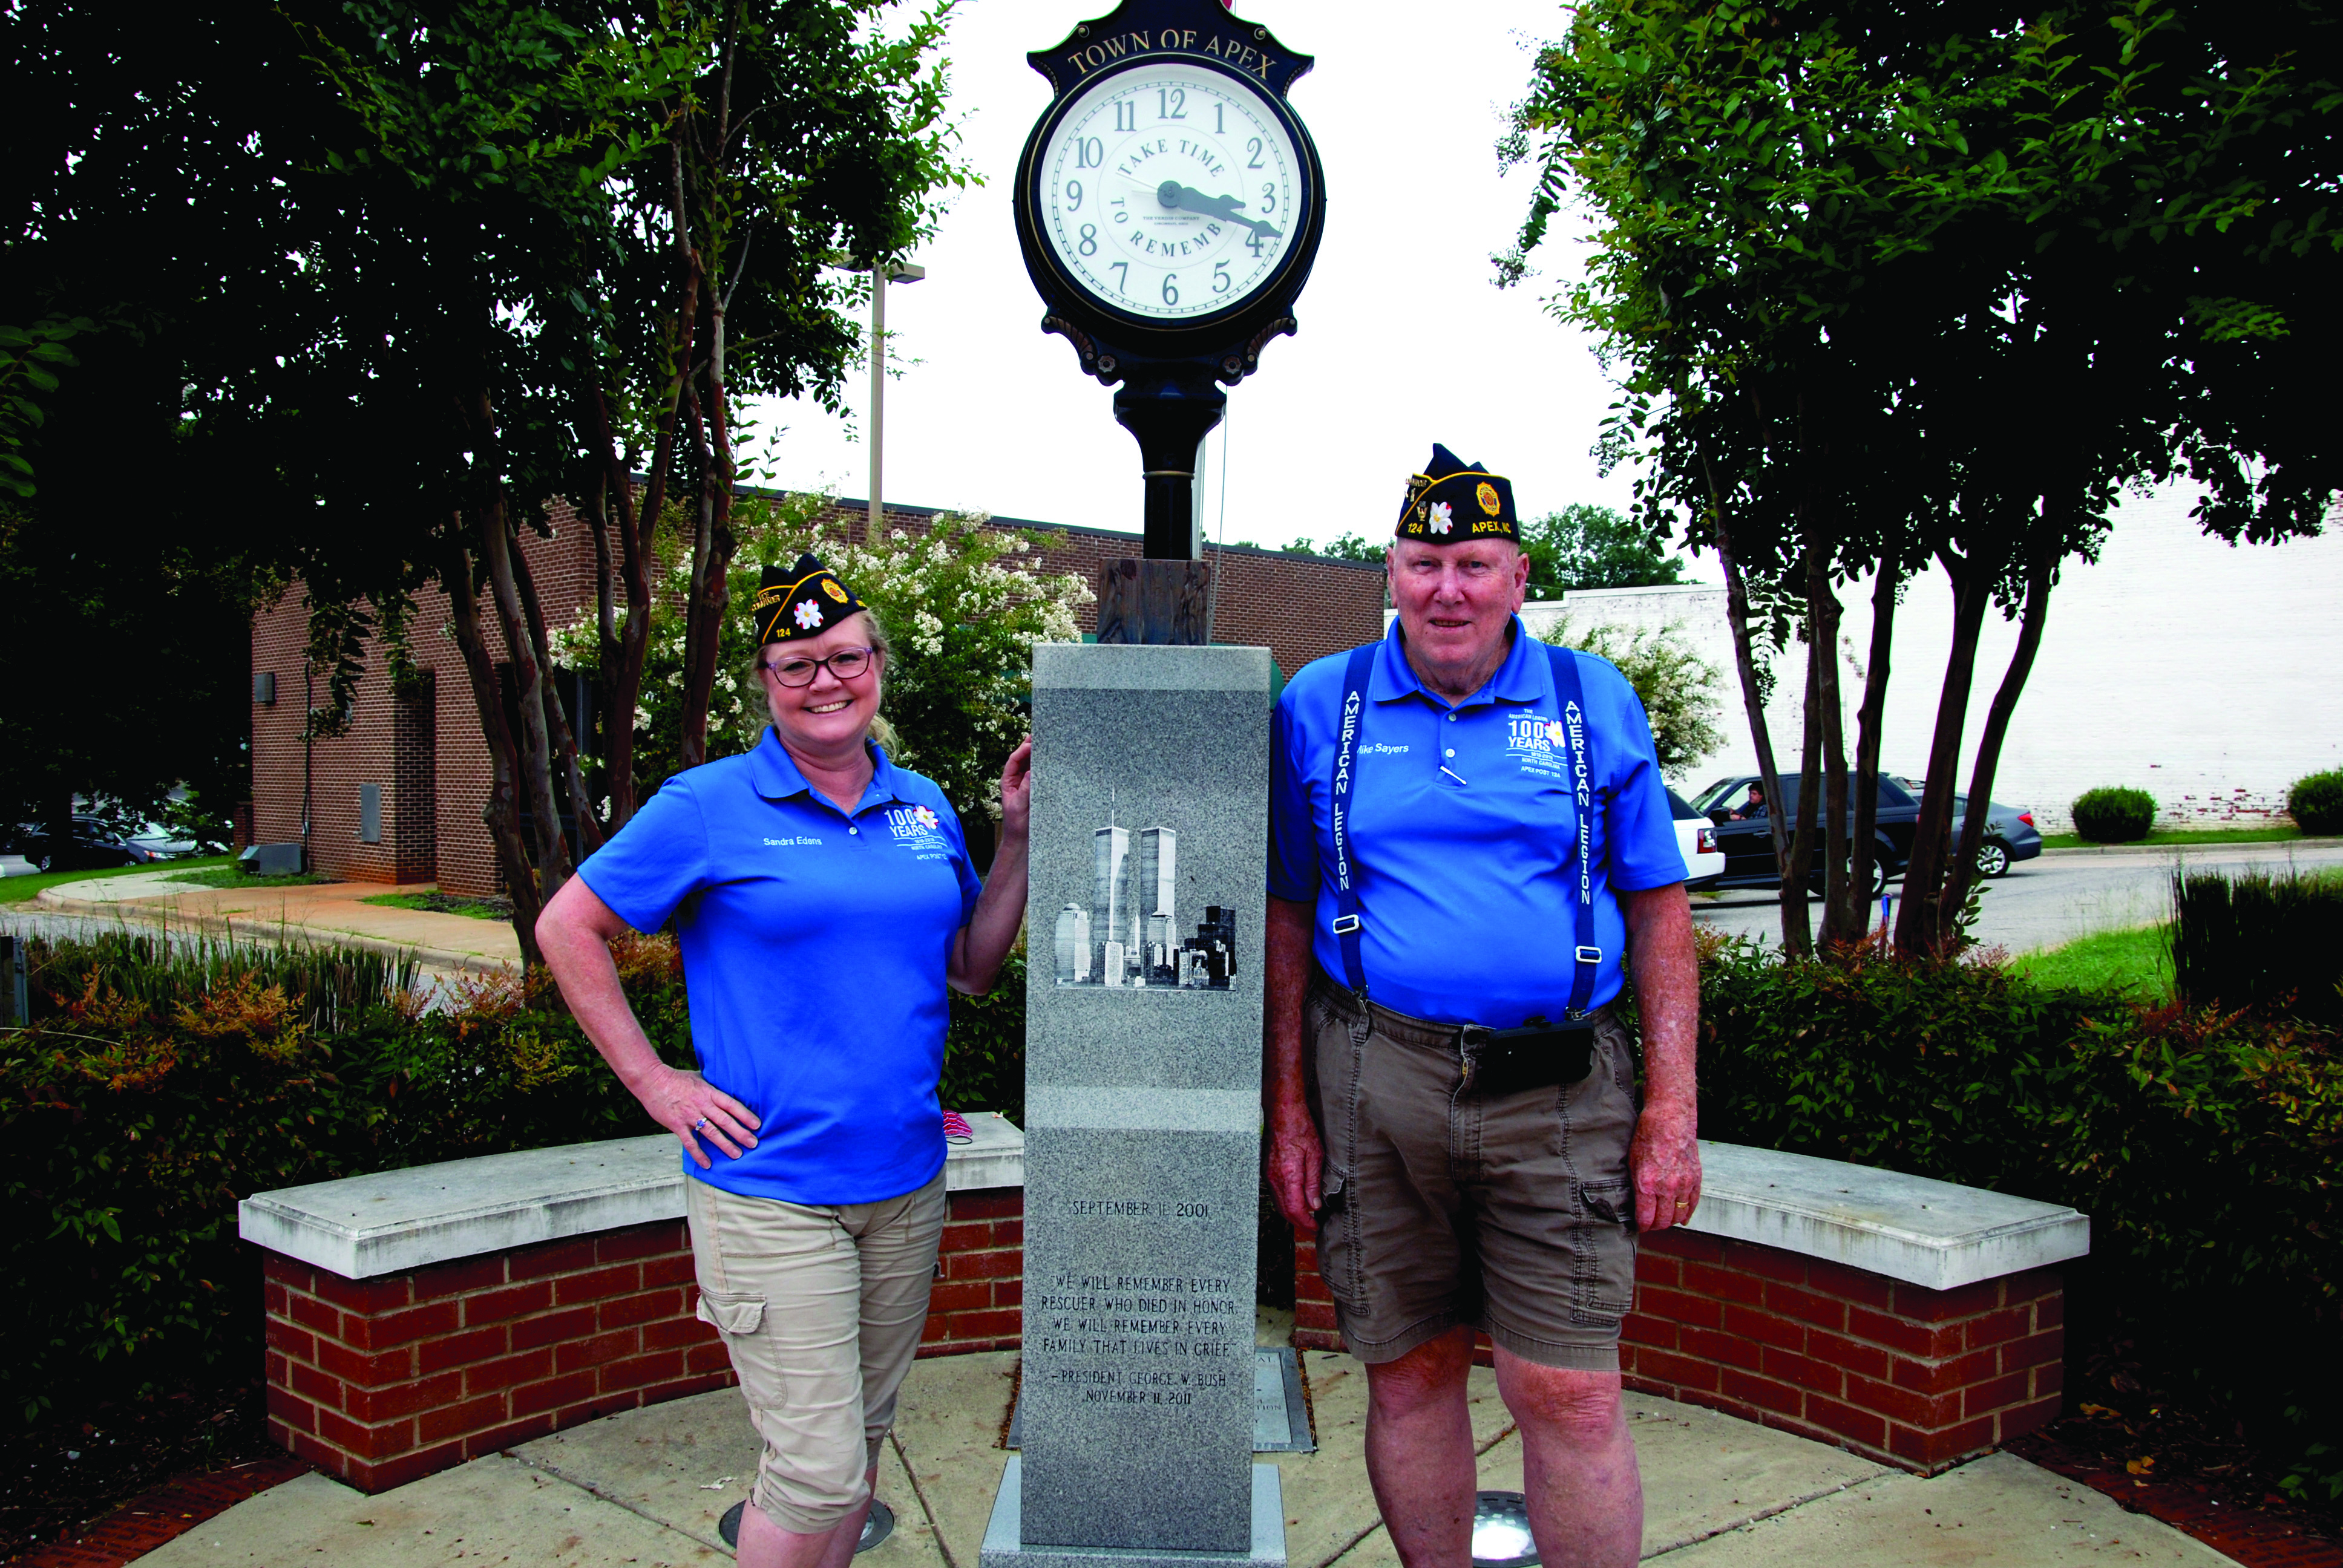 American Legion Post 124 Proudly Serves Apex		By Janice Lewine